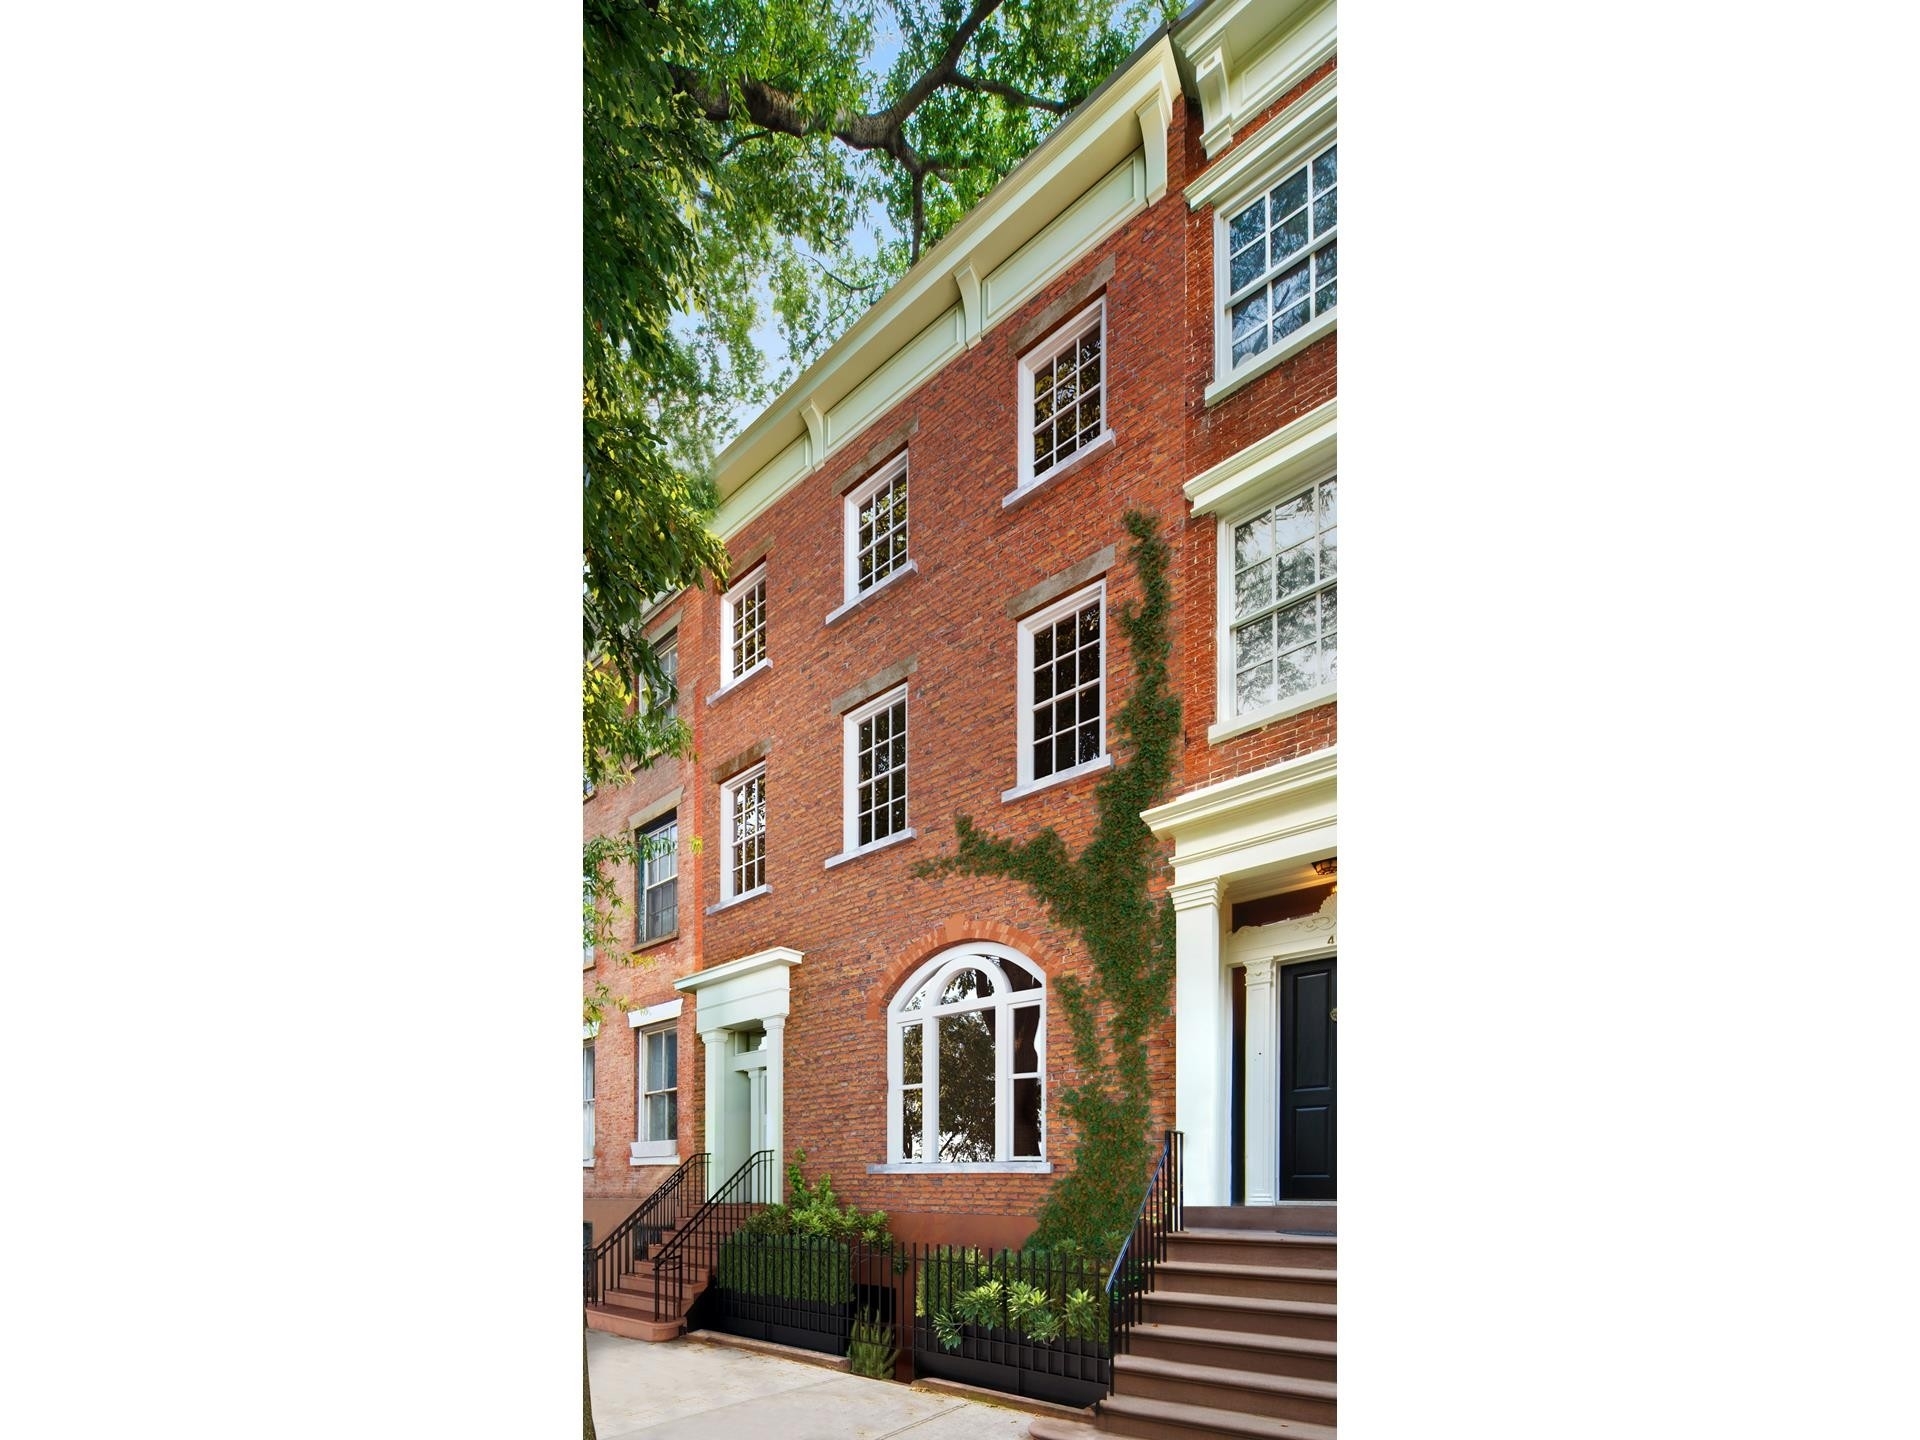 Multi Family Townhouse for Sale at 38 W 11TH ST, TWNHSE Greenwich Village, New York, New York 10011